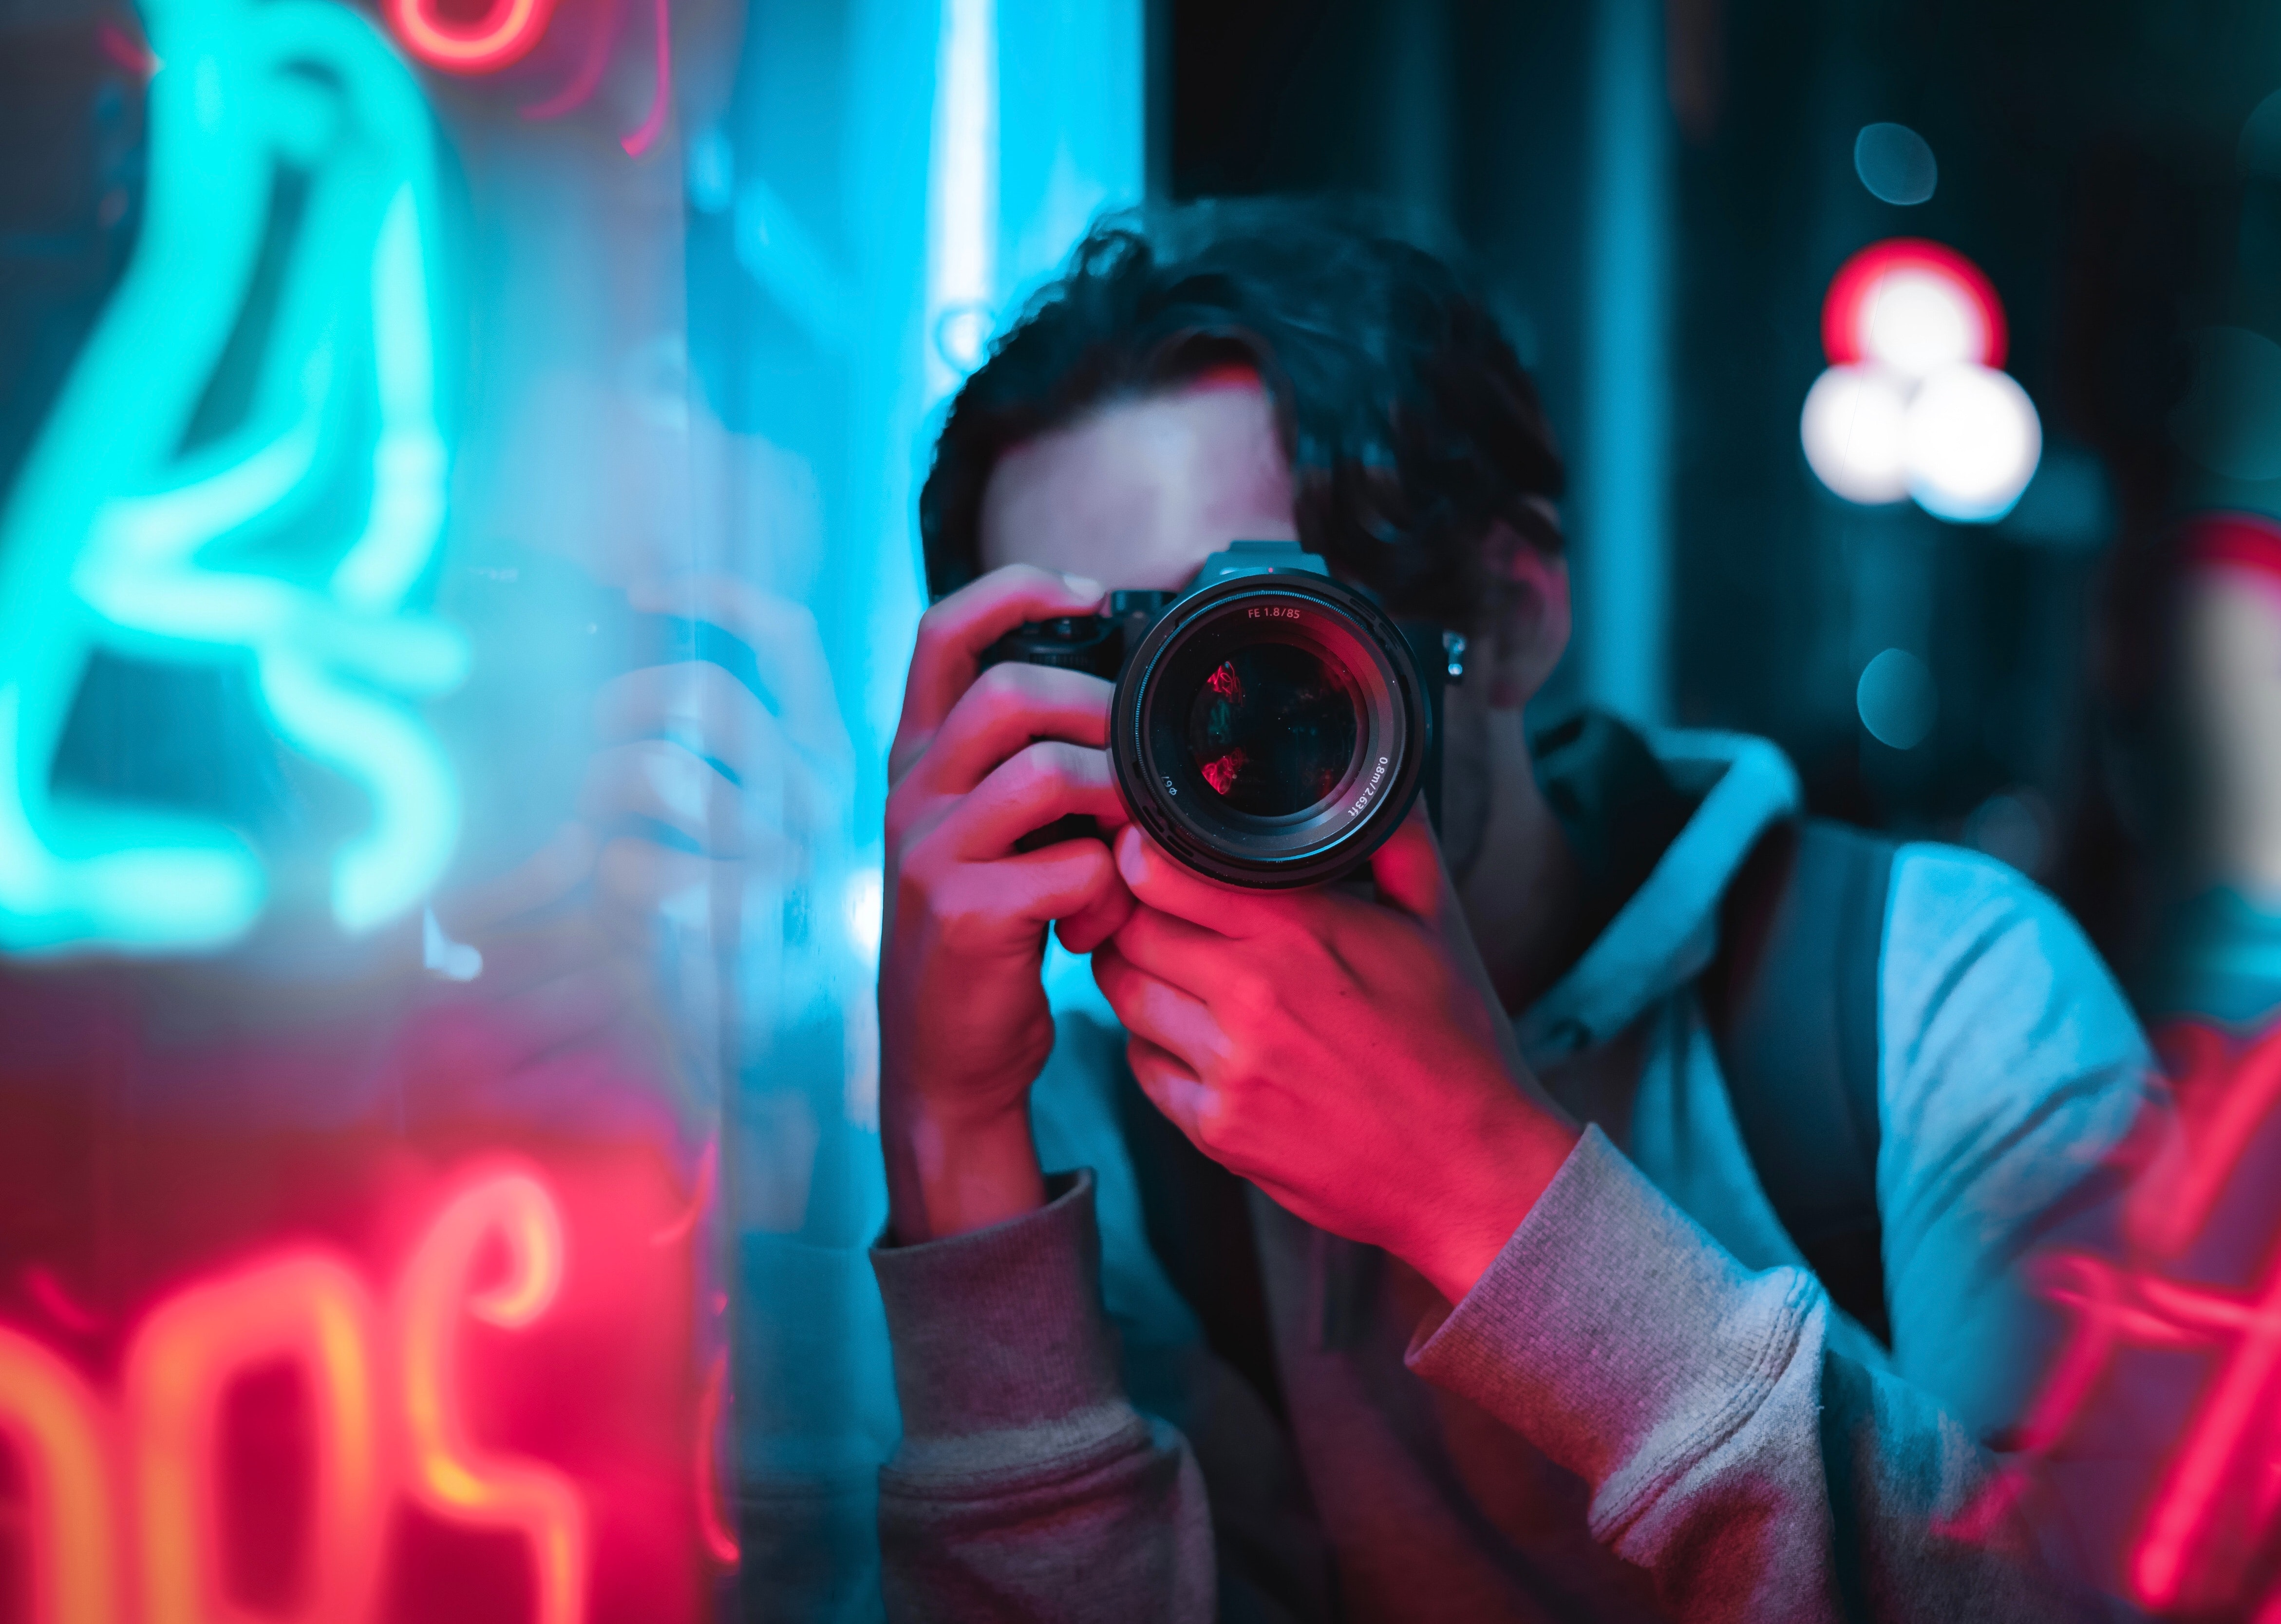 vividly colored picture of photographer